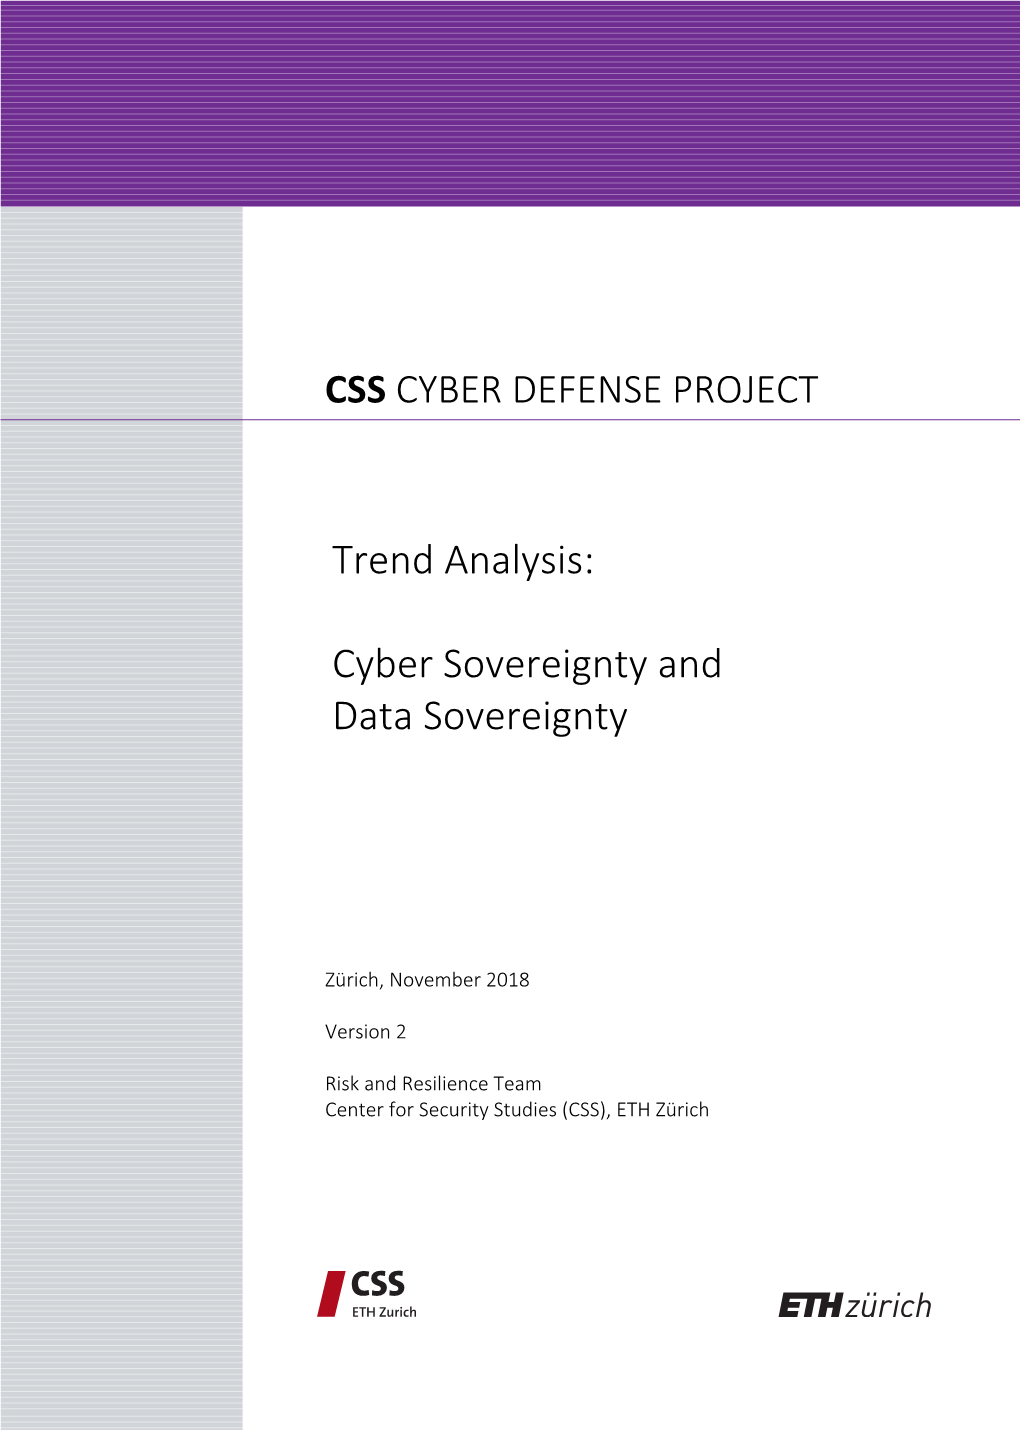 Trend Analysis: Cyber Sovereignty and Data Sovereignty